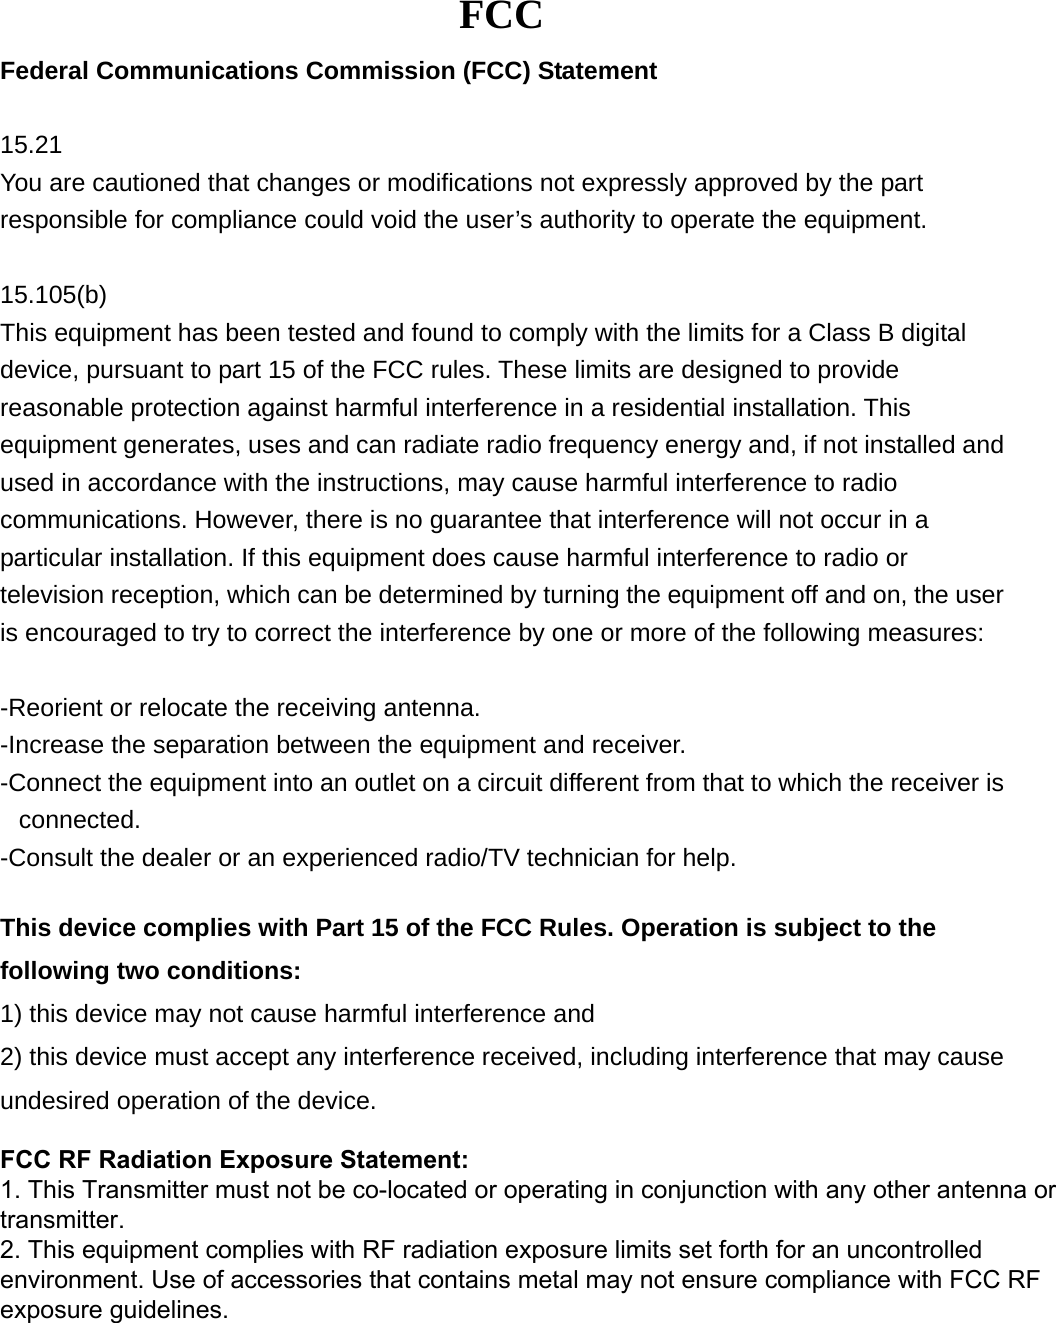 FCC Federal Communications Commission (FCC) Statement 15.21 You are cautioned that changes or modifications not expressly approved by the part responsible for compliance could void the user’s authority to operate the equipment. 15.105(b) This equipment has been tested and found to comply with the limits for a Class B digital device, pursuant to part 15 of the FCC rules. These limits are designed to provide reasonable protection against harmful interference in a residential installation. This equipment generates, uses and can radiate radio frequency energy and, if not installed and used in accordance with the instructions, may cause harmful interference to radio communications. However, there is no guarantee that interference will not occur in a particular installation. If this equipment does cause harmful interference to radio or television reception, which can be determined by turning the equipment off and on, the user is encouraged to try to correct the interference by one or more of the following measures: -Reorient or relocate the receiving antenna.-Increase the separation between the equipment and receiver.-Connect the equipment into an outlet on a circuit different from that to which the receiver isconnected.-Consult the dealer or an experienced radio/TV technician for help.This device complies with Part 15 of the FCC Rules. Operation is subject to the following two conditions:   1) this device may not cause harmful interference and2) this device must accept any interference received, including interference that may causeundesired operation of the device.FCC RF Radiation Exposure Statement: 1. This Transmitter must not be co-located or operating in conjunction with any other antenna or transmitter.2. This equipment complies with RF radiation exposure limits set forth for an uncontrolled environment. Use of accessories that contains metal may not ensure compliance with FCC RF exposure guidelines. 